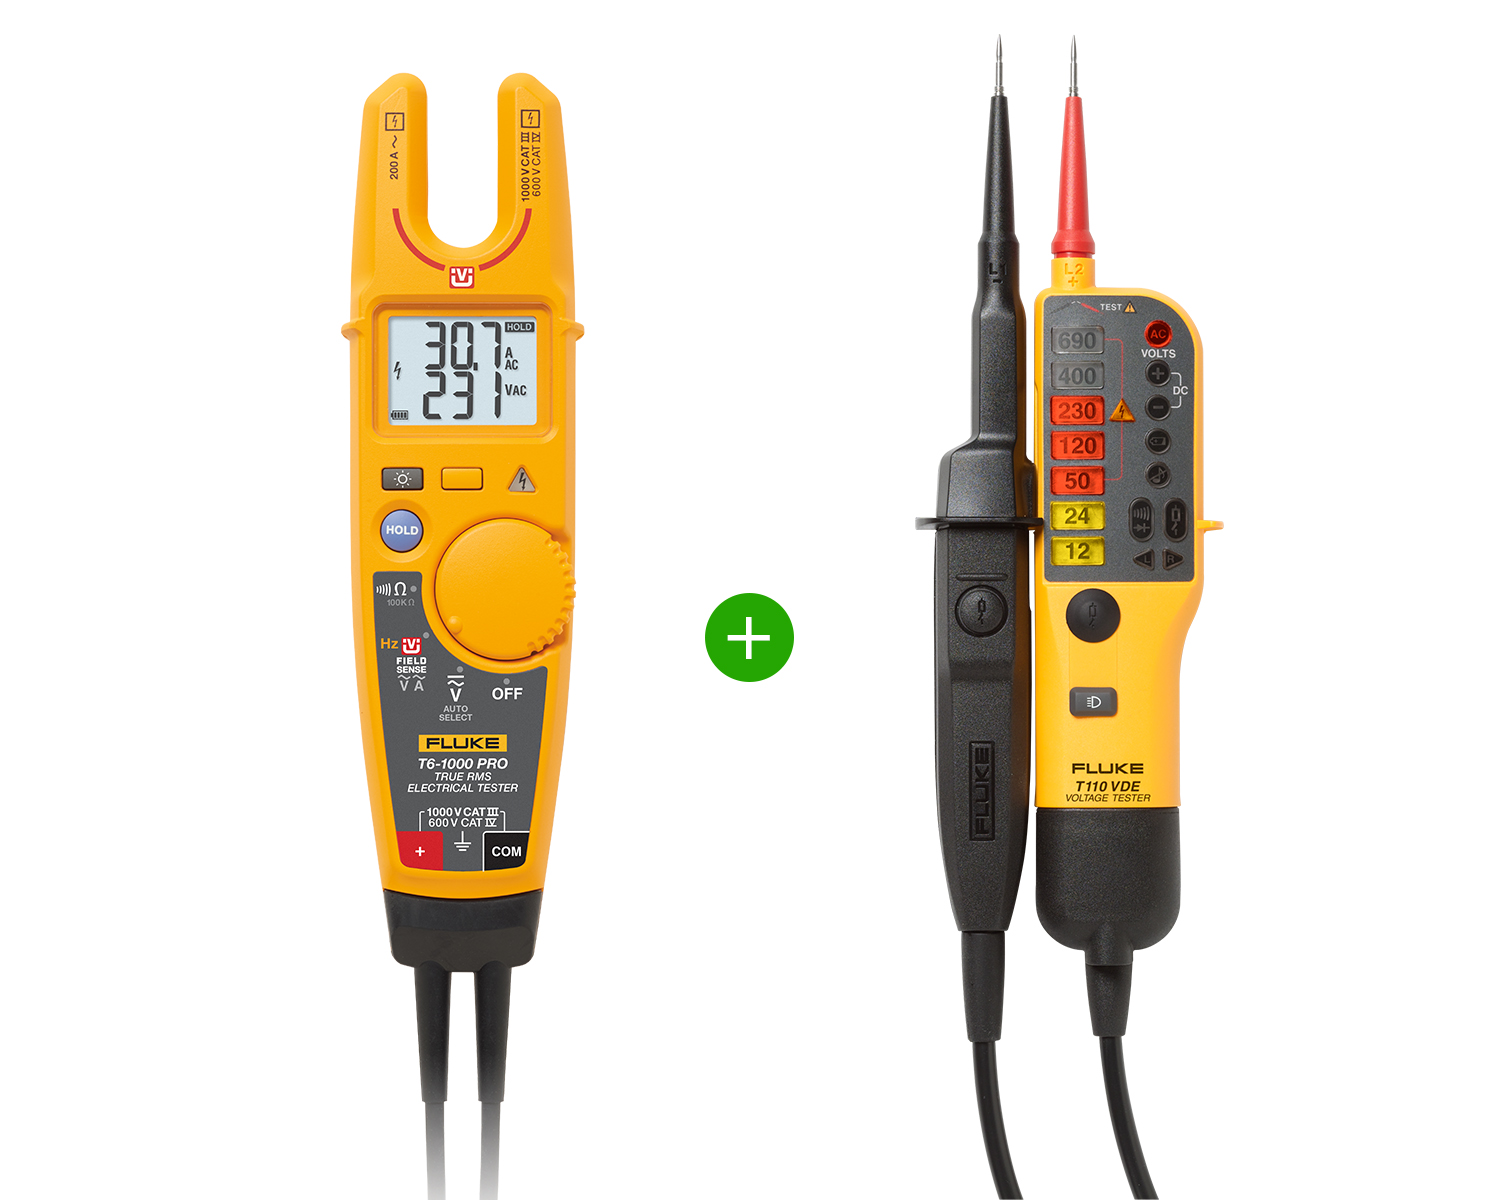 Fluke 1664 FC Multifunction Installation Tester plus a T6-1000 PRO Electrical Tester.